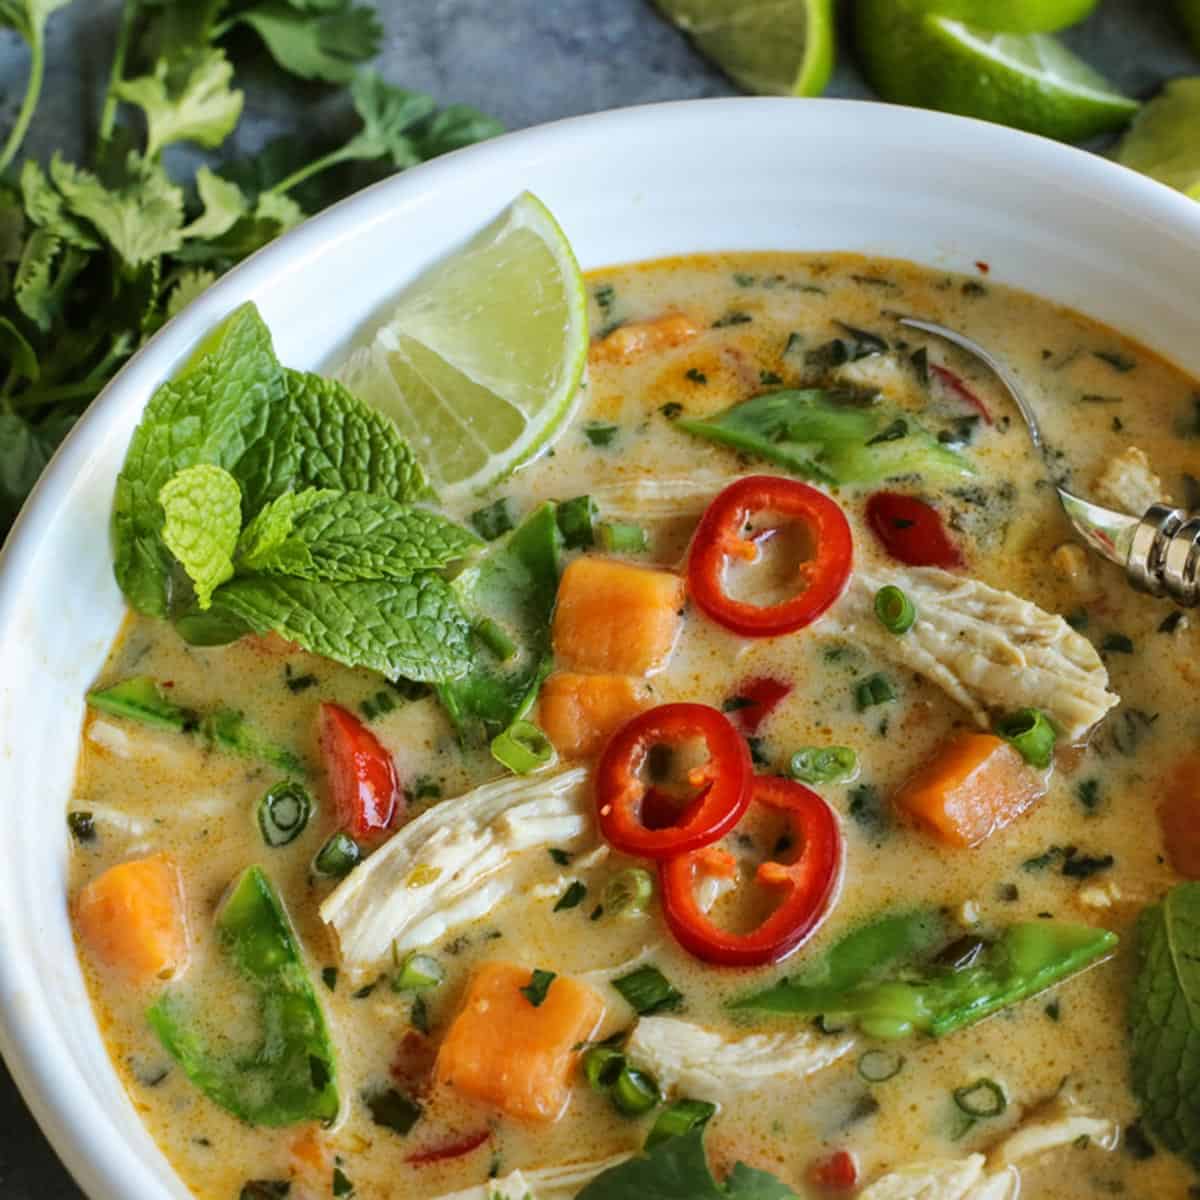 Soup with chicken and Thai flavors served in a bowl with fresh mint, lime, and peppers